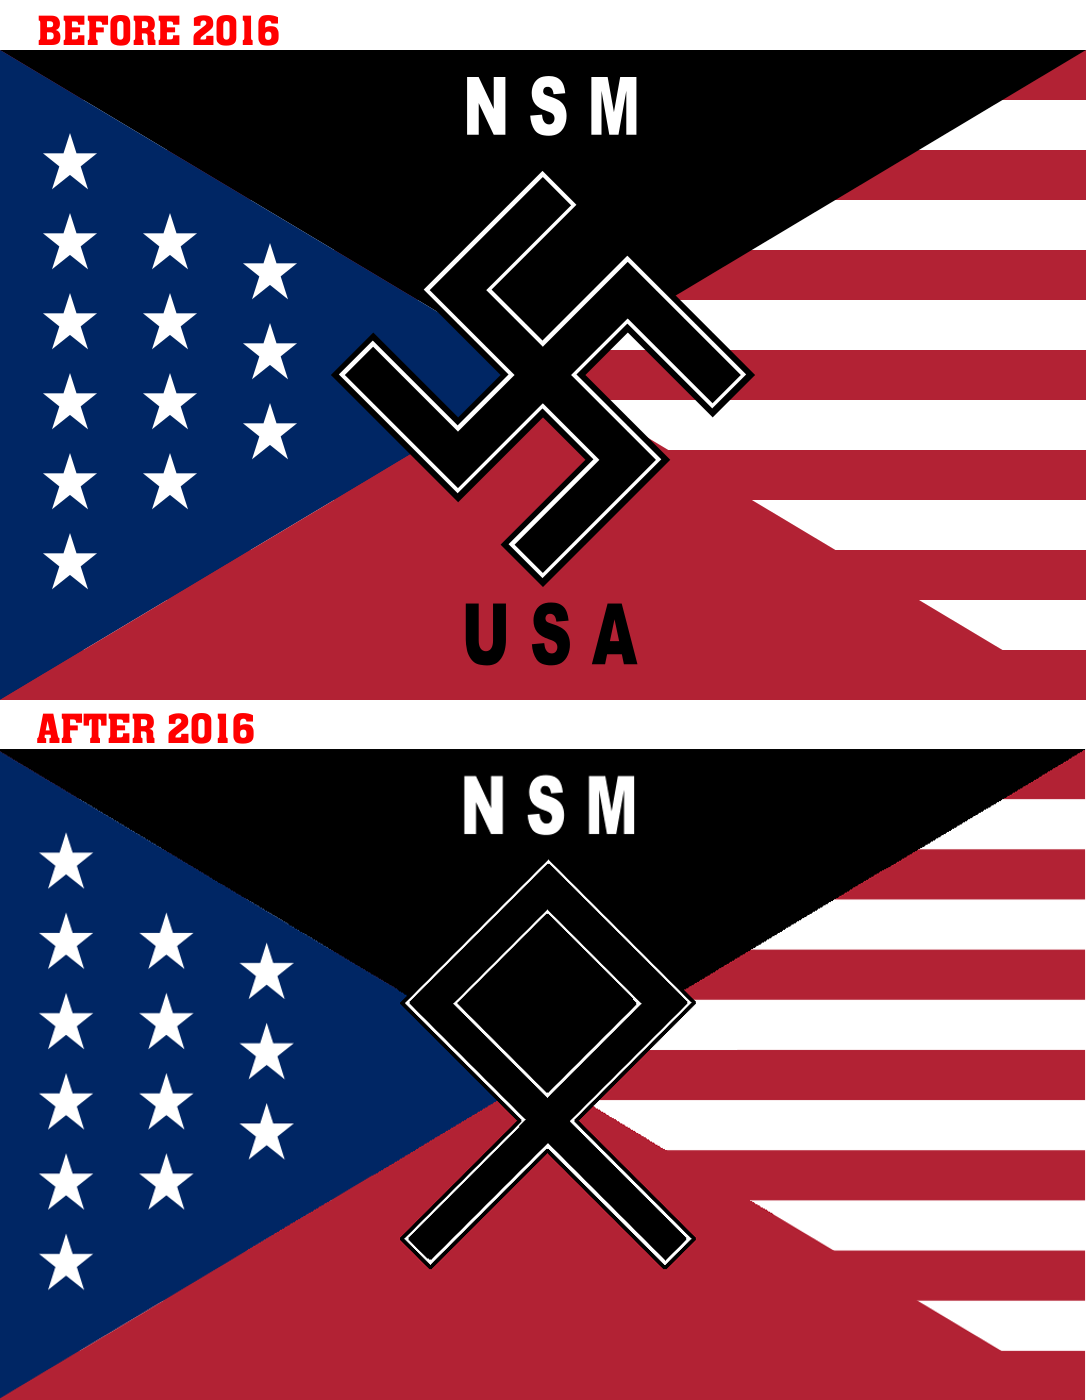 in 2016, the National Socialist Movement changed their logo from the swastika to the Odal rune in an attempt to broaden the appeal of their nazi politics